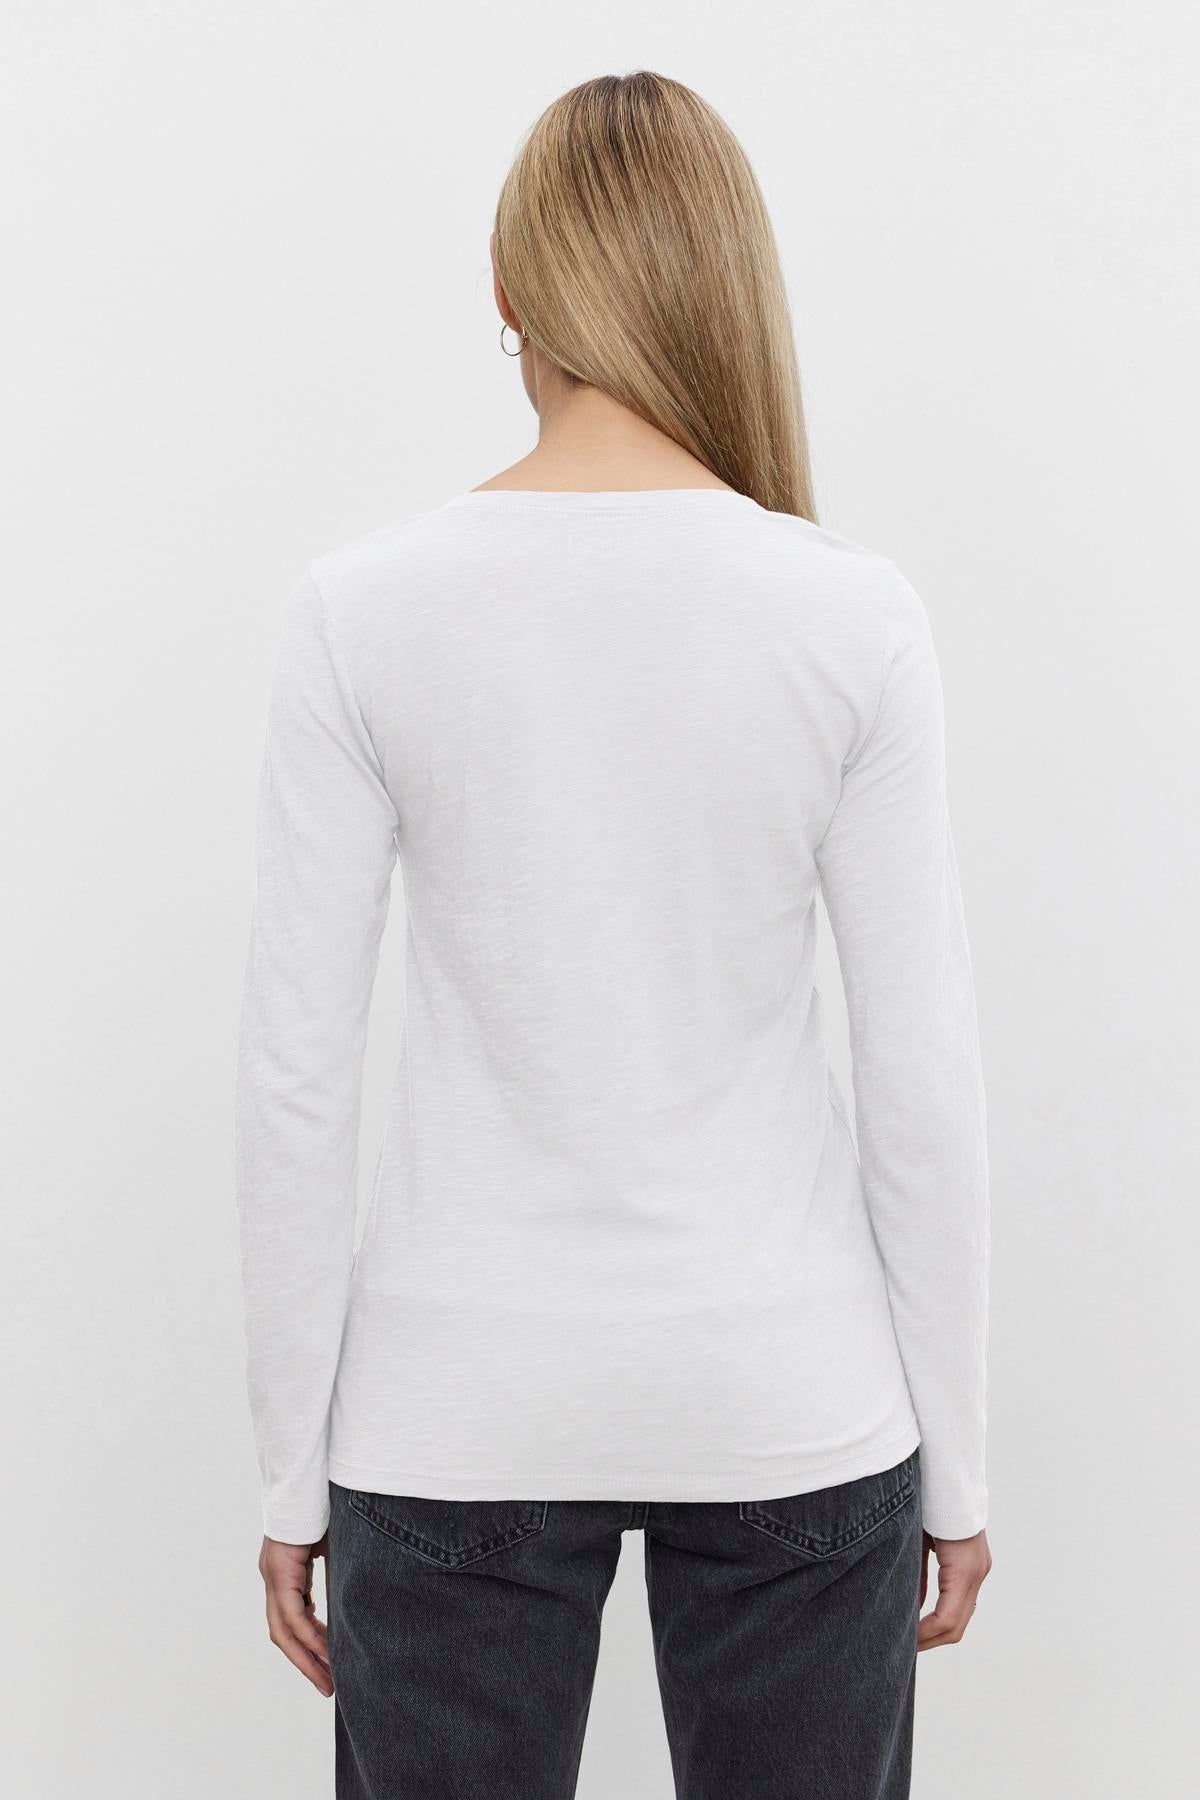   A person with long, straight hair wearing a white BLAIRE TEE by Velvet by Graham & Spencer and dark jeans is shown from the back against a plain background. 